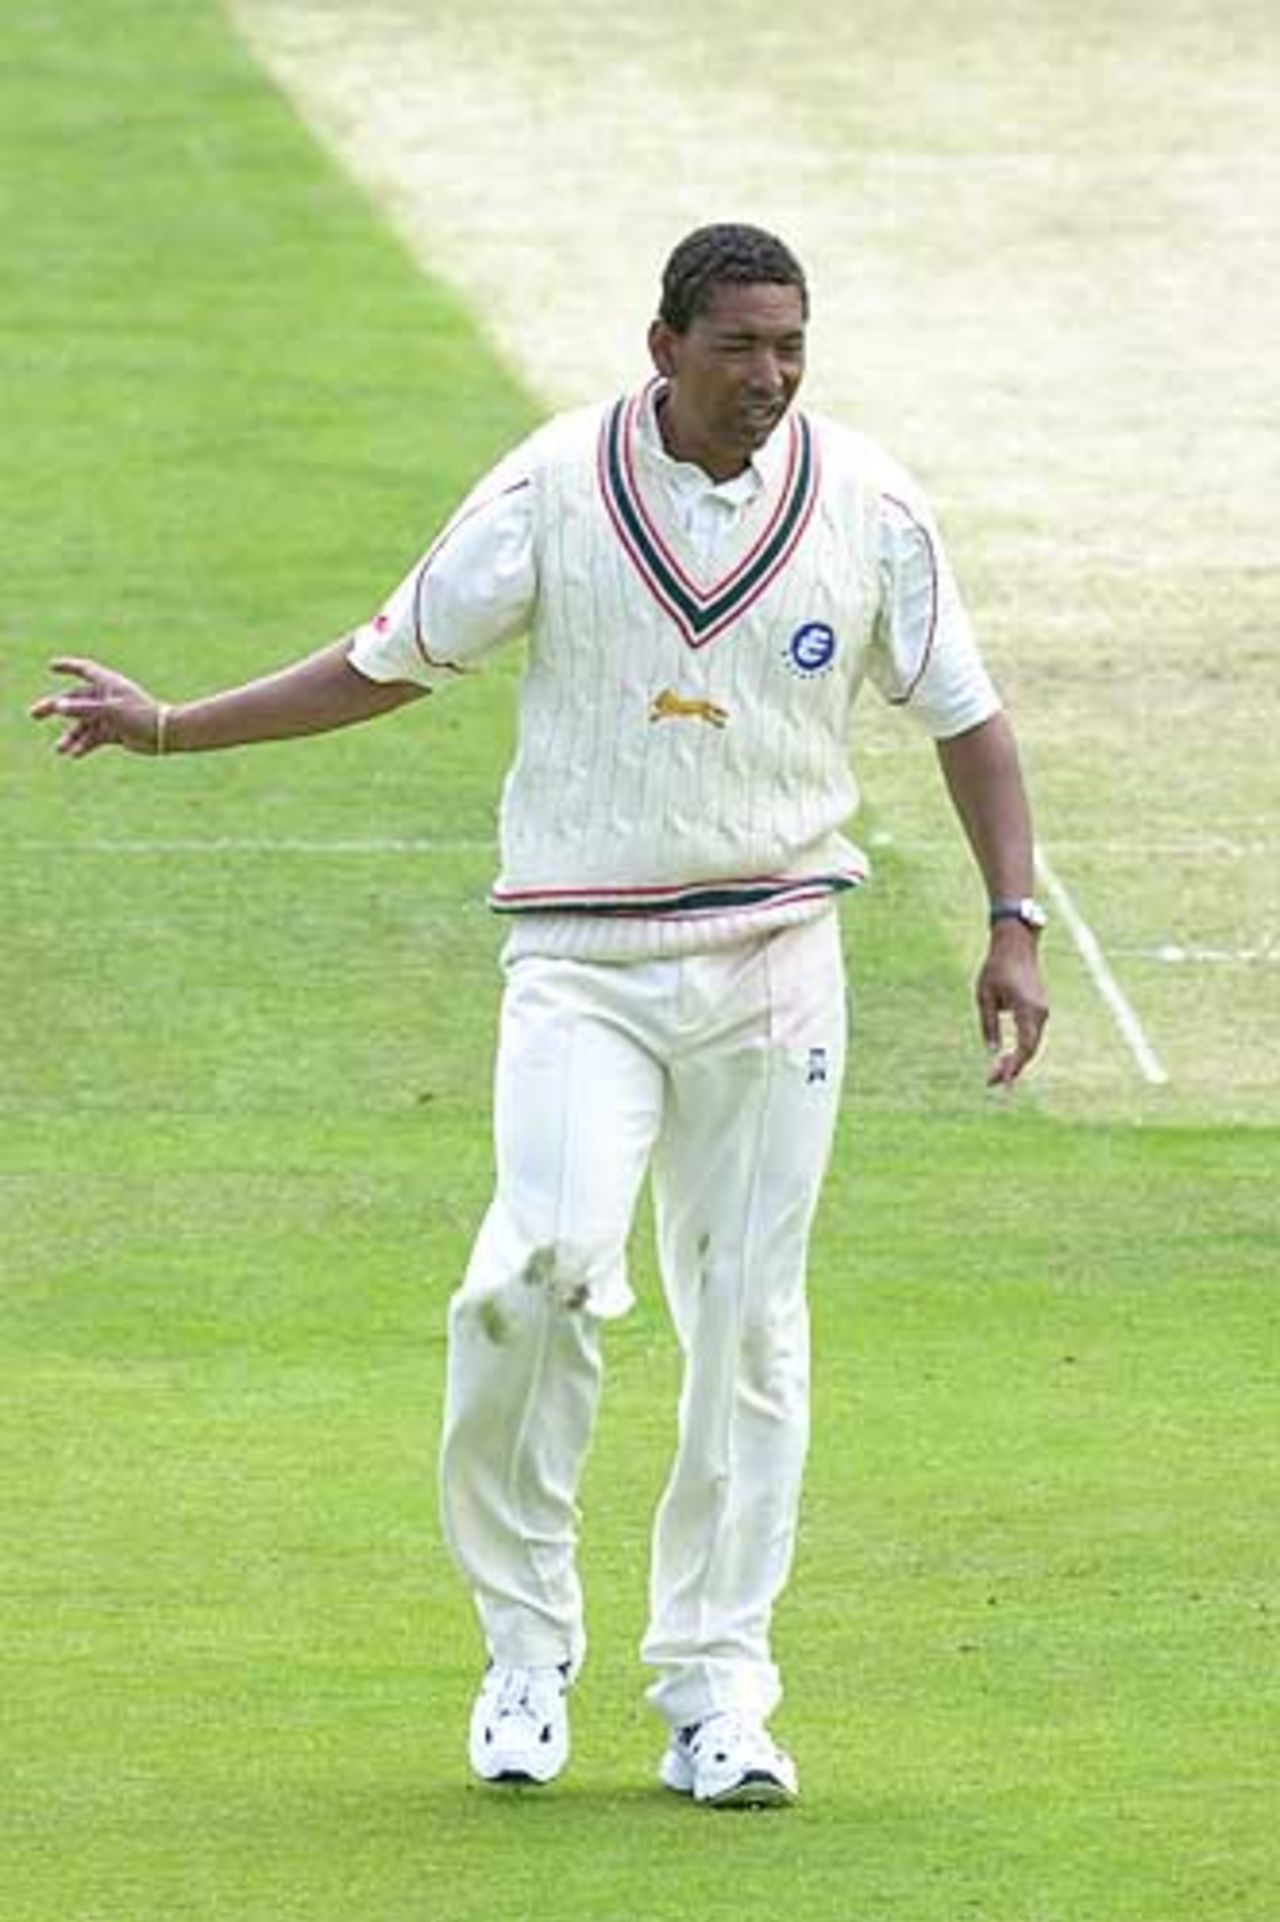 Philip Defreitas in the field for Leicestershire in the Cheltenham and Gloucester Trophy, 11 July 2001 , Trent Bridge Nottingham